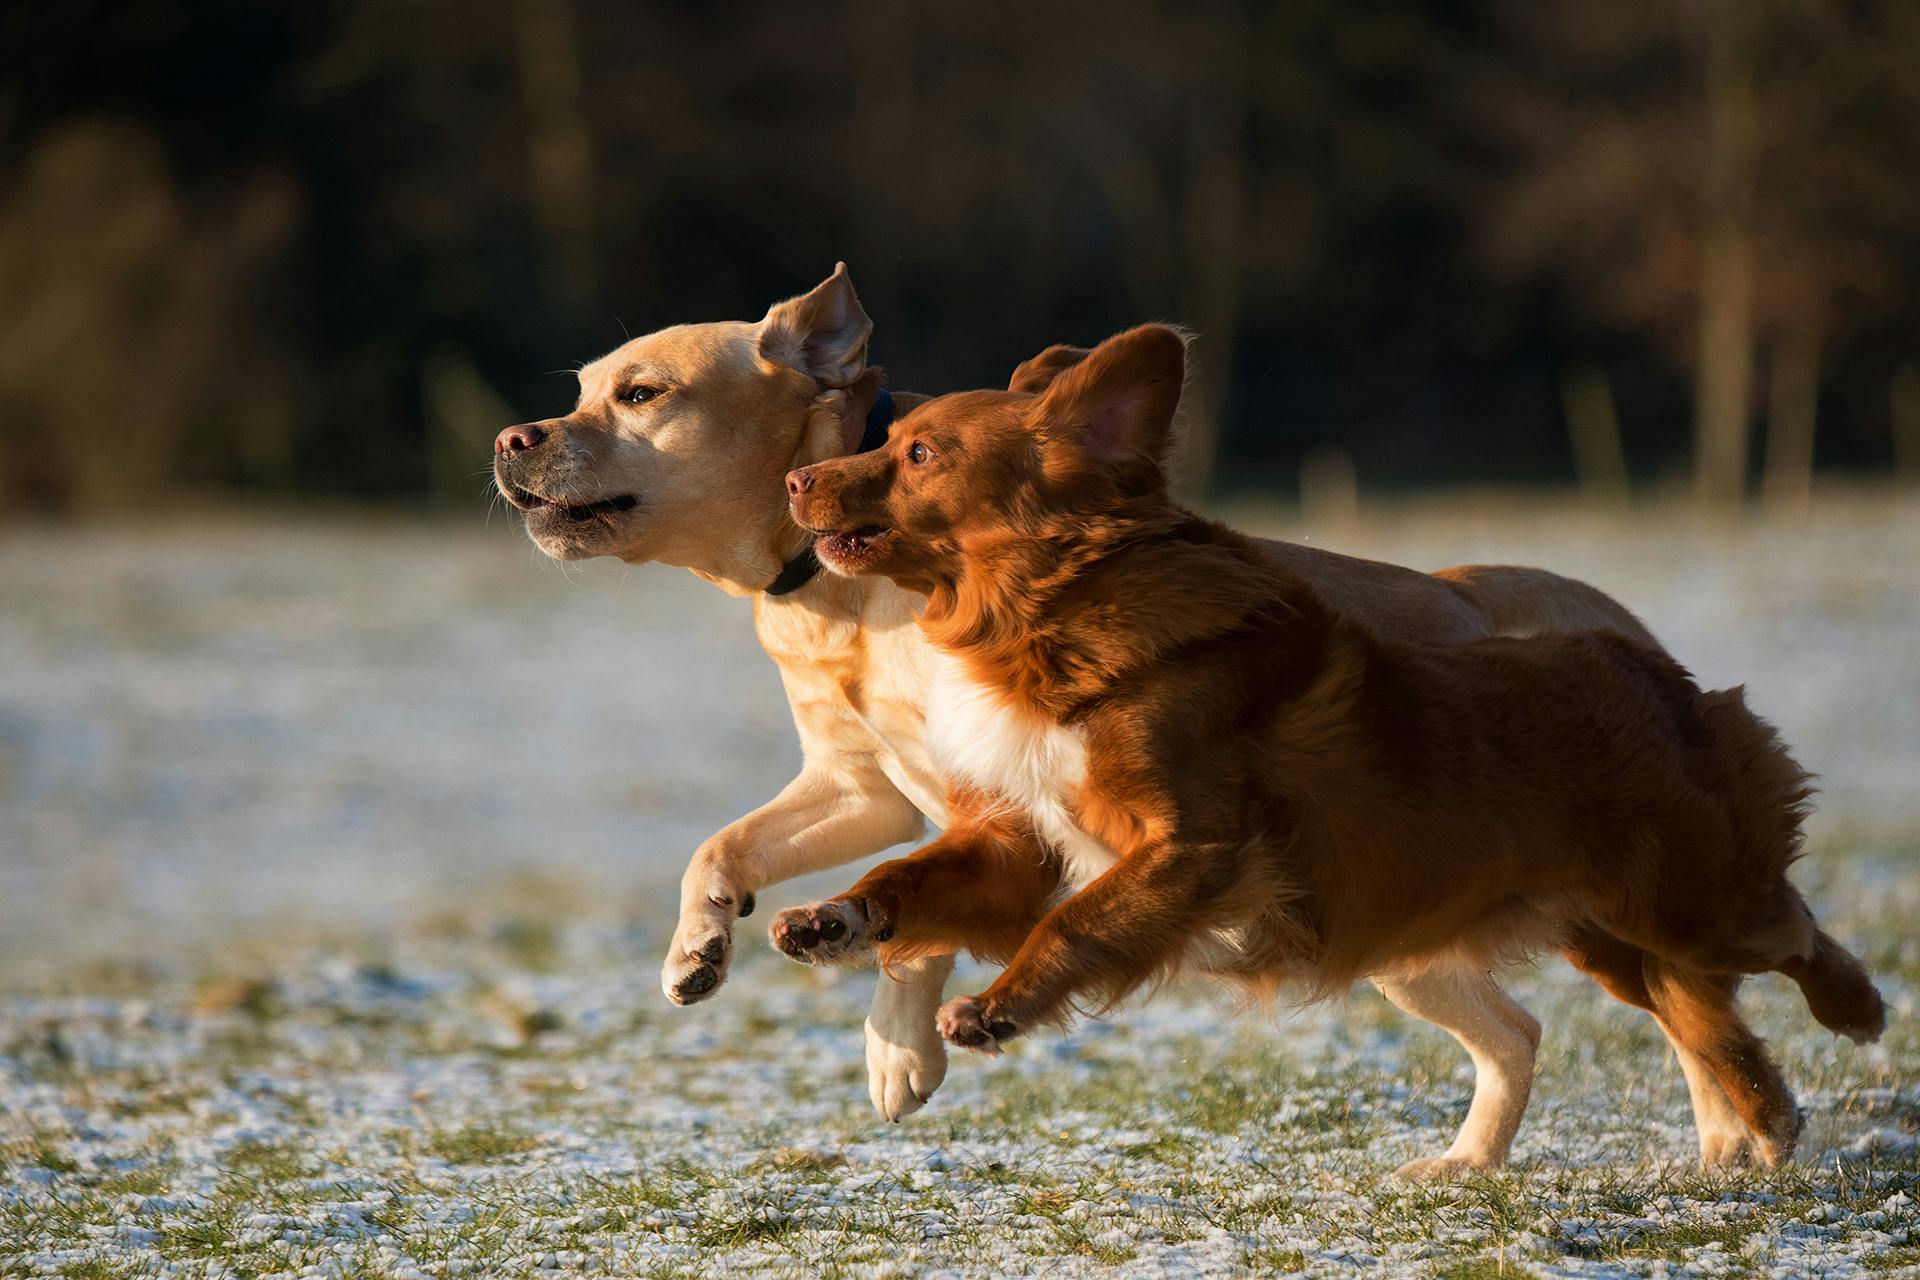 Two dogs running togther